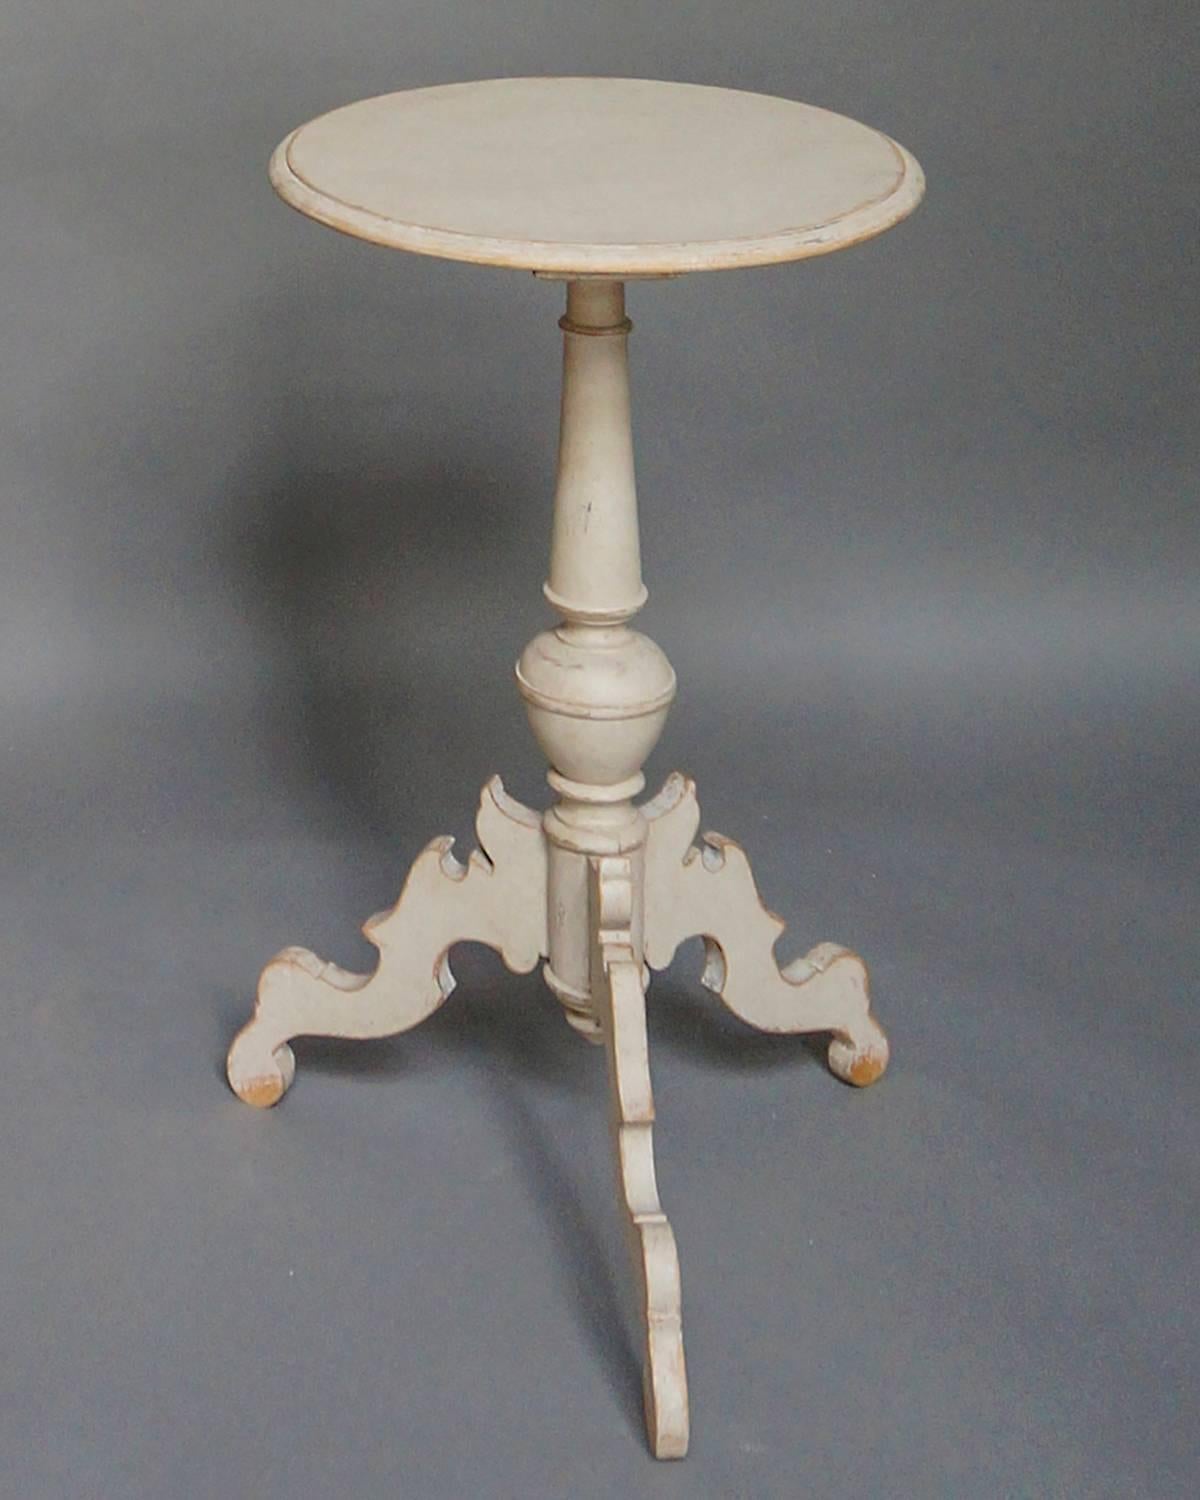 Pedestal table, Sweden, circa 1860, with round top and turned pedestal. The elaborate form of the three scrolled legs is typically Swedish and very decorative. This table would be right at home in any room.